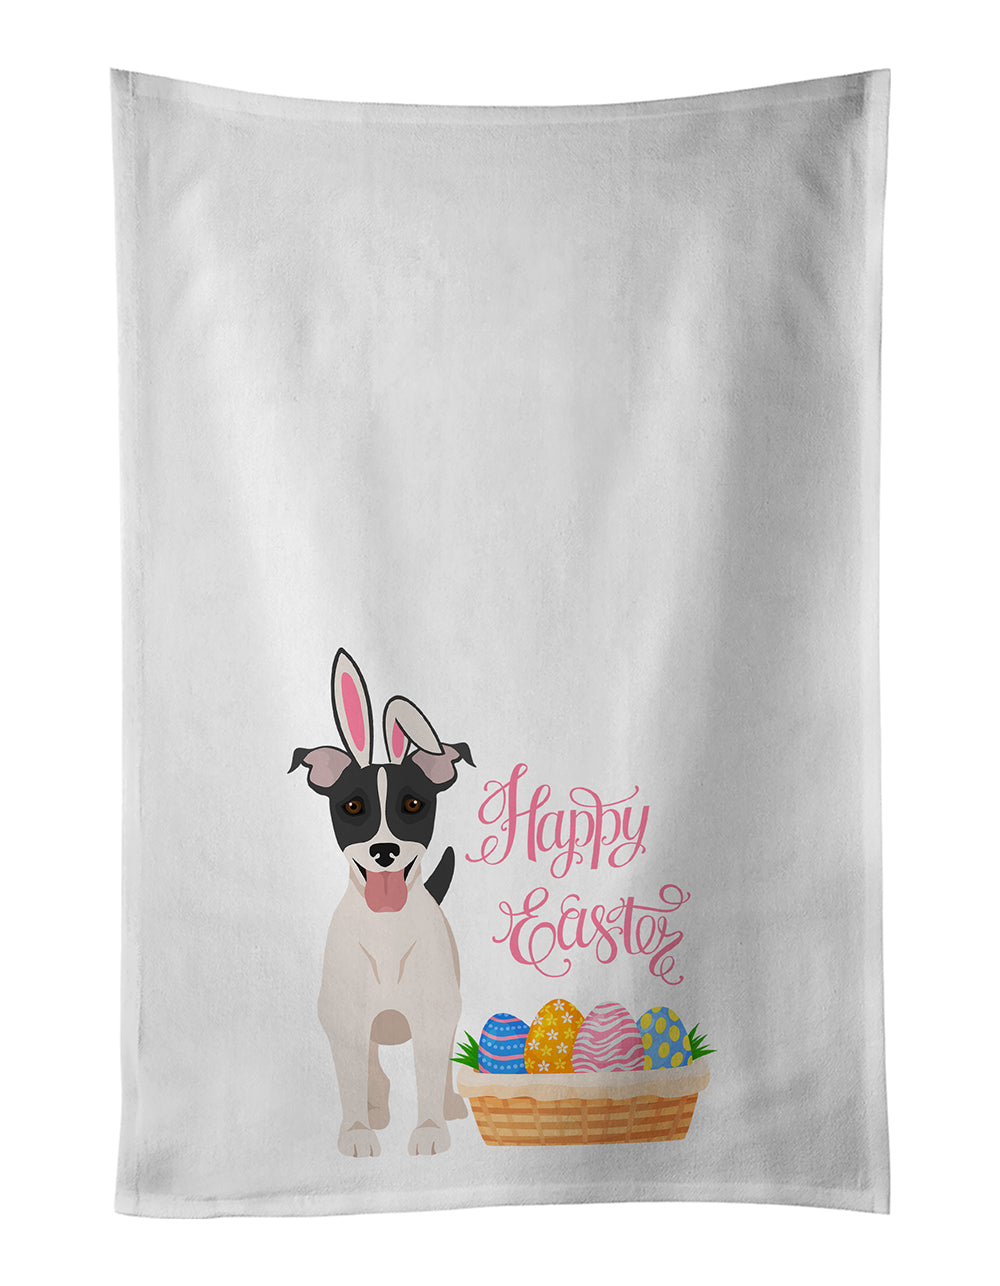 Buy this Black White Smooth Jack Russell Terrier Easter White Kitchen Towel Set of 2 Dish Towels